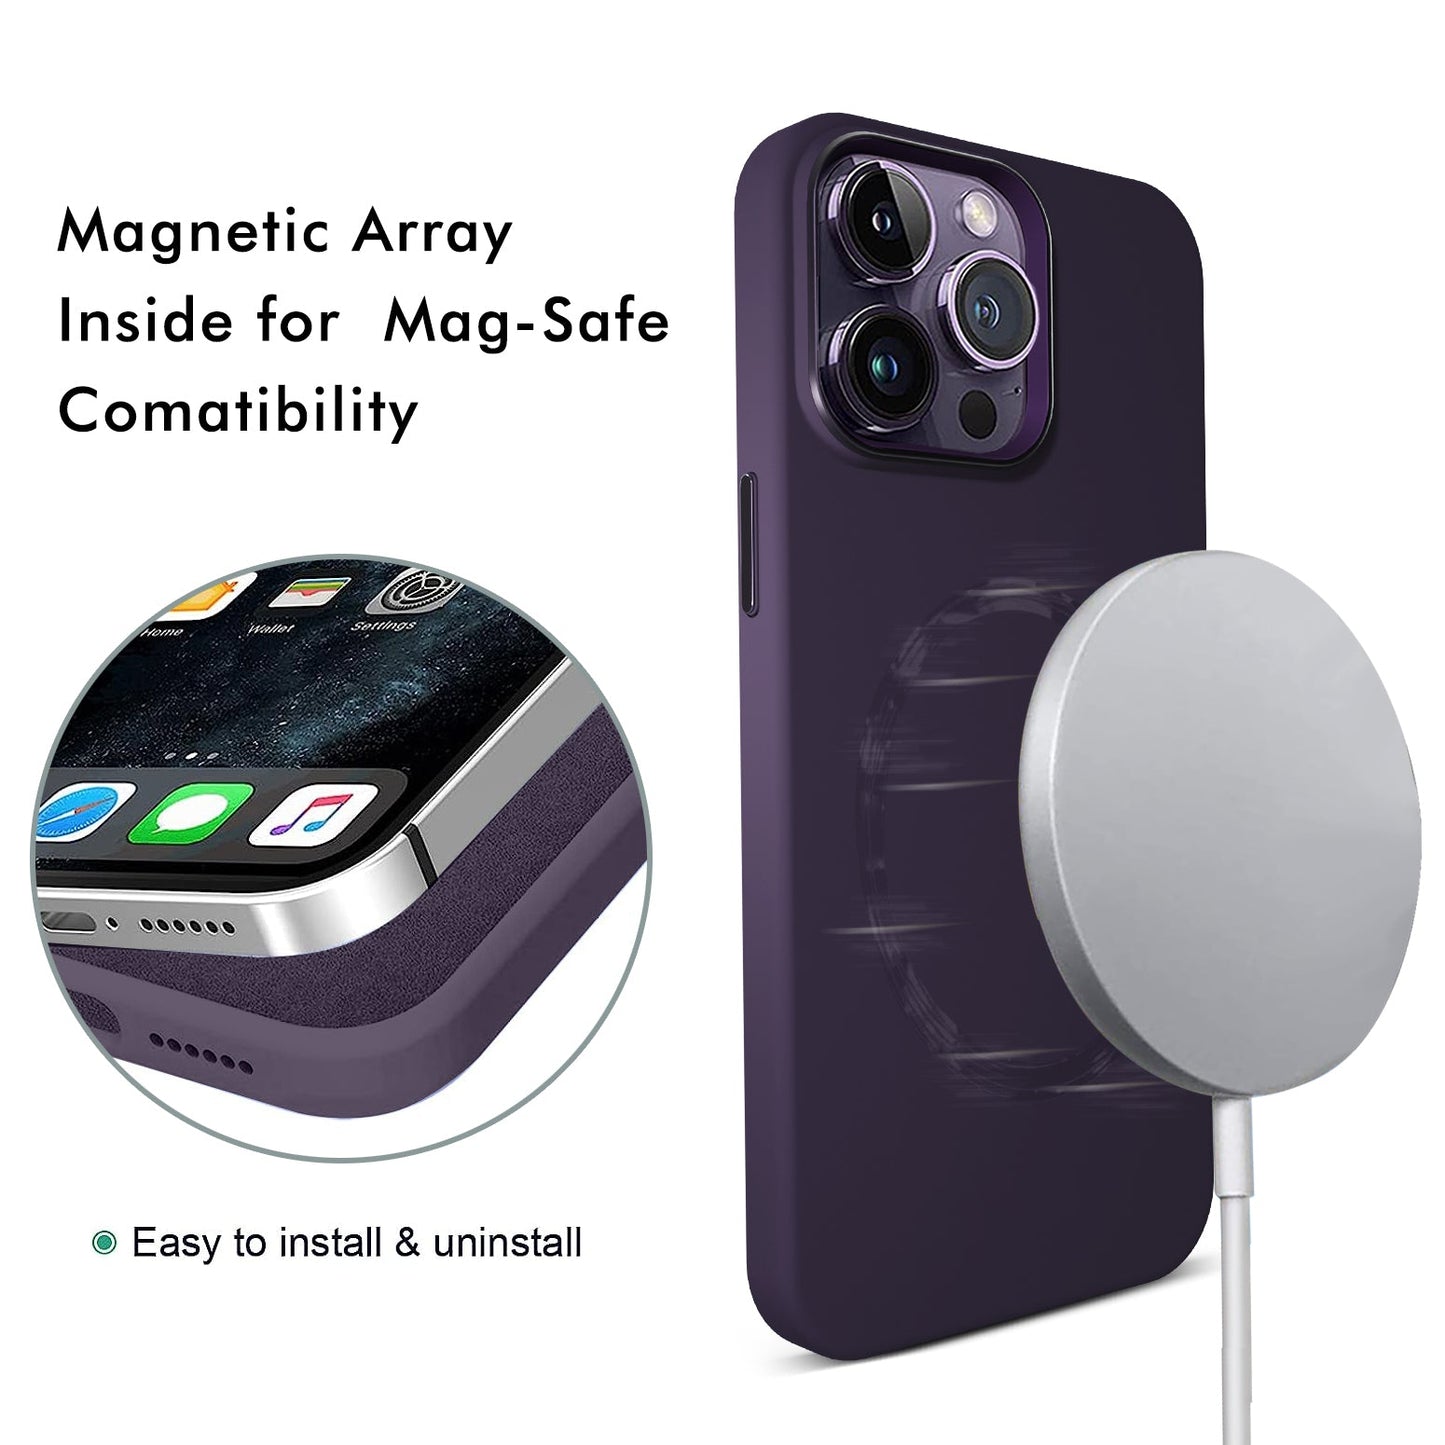 Gripp Rubon Case For Apple Iphone 14 Pro (6.1") With Magsafe - Purple